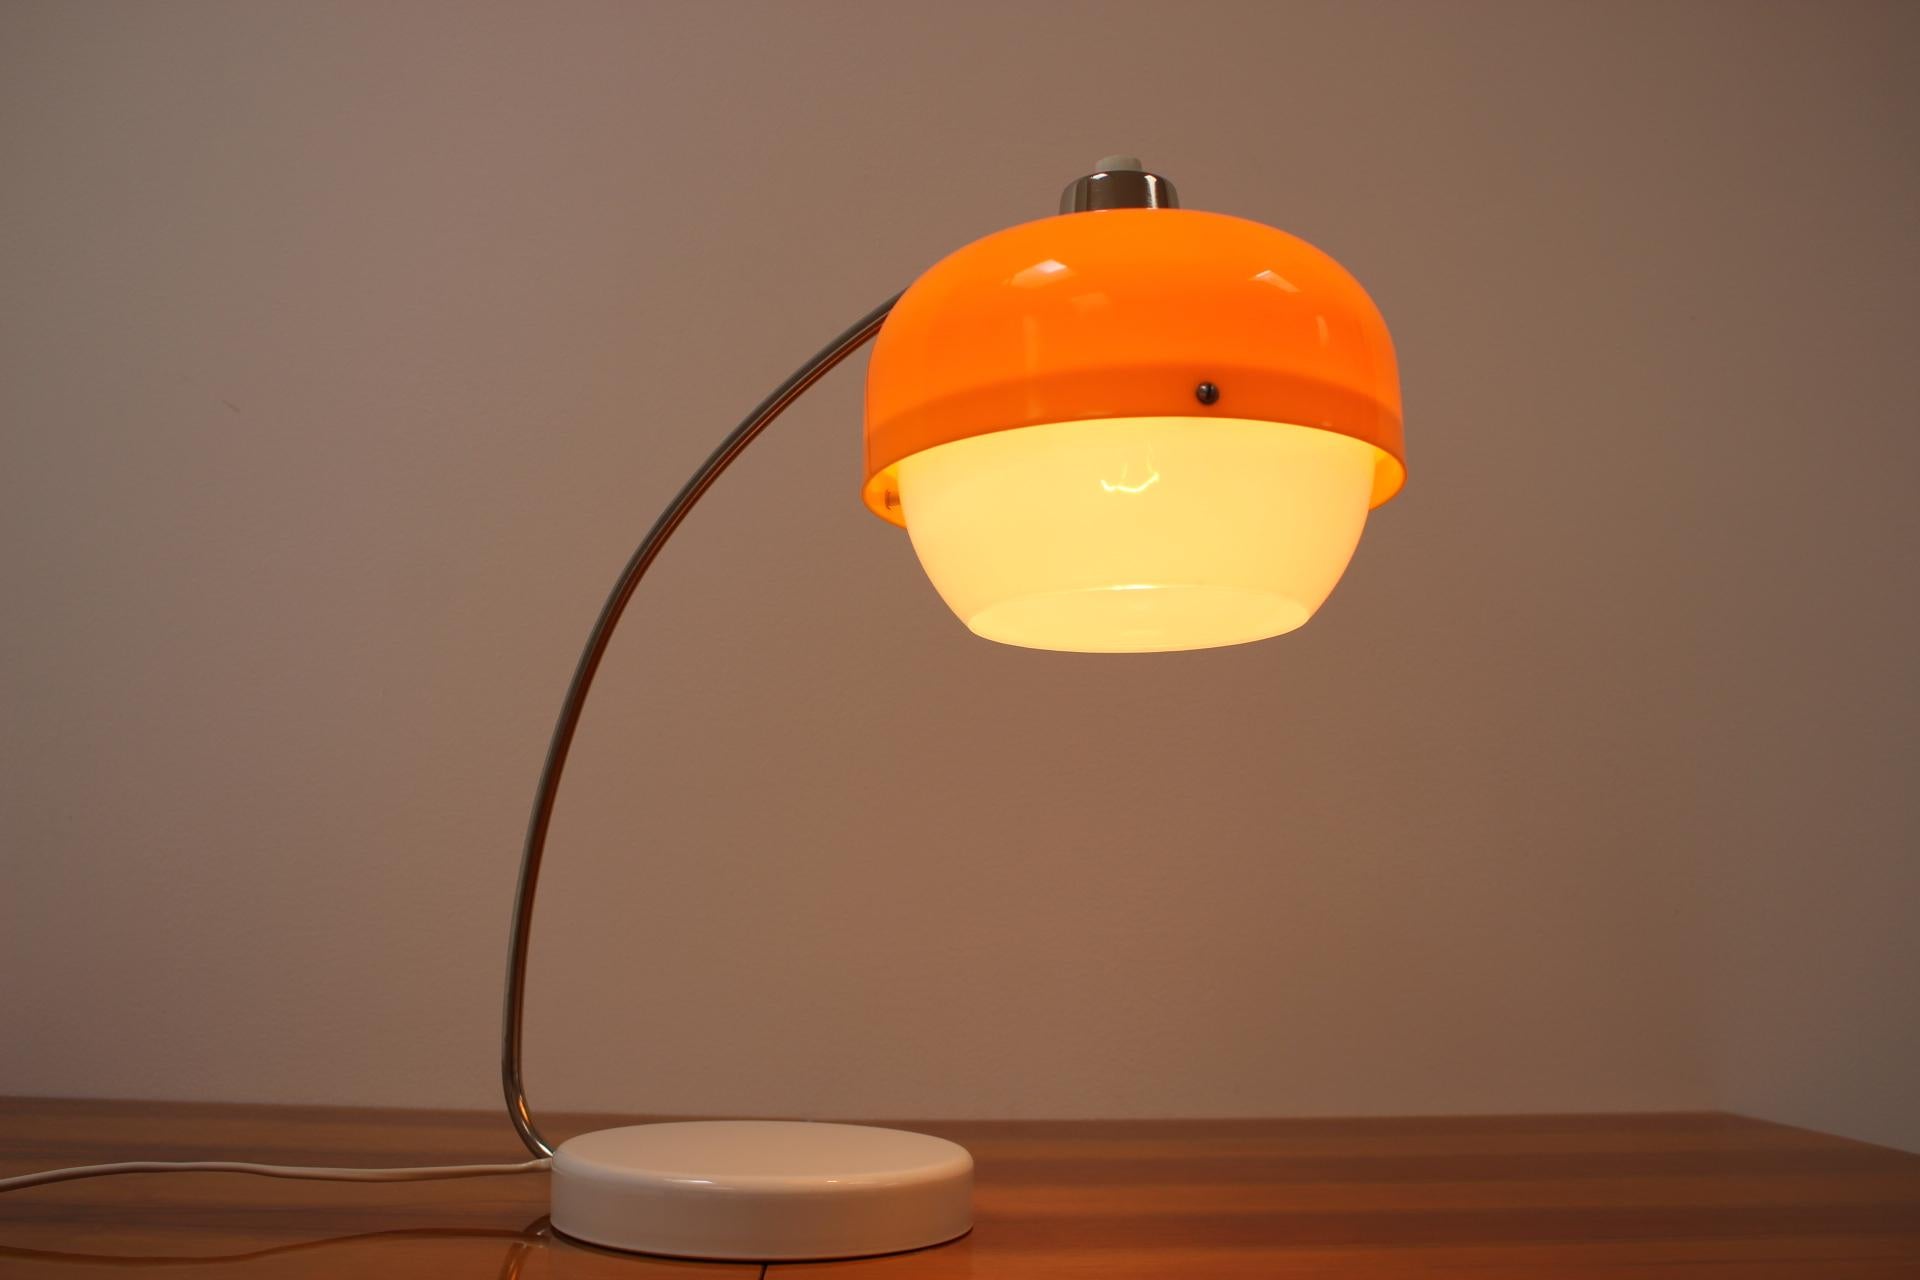 Design Table Lamp in Style of Guzzini, 1970's For Sale 1